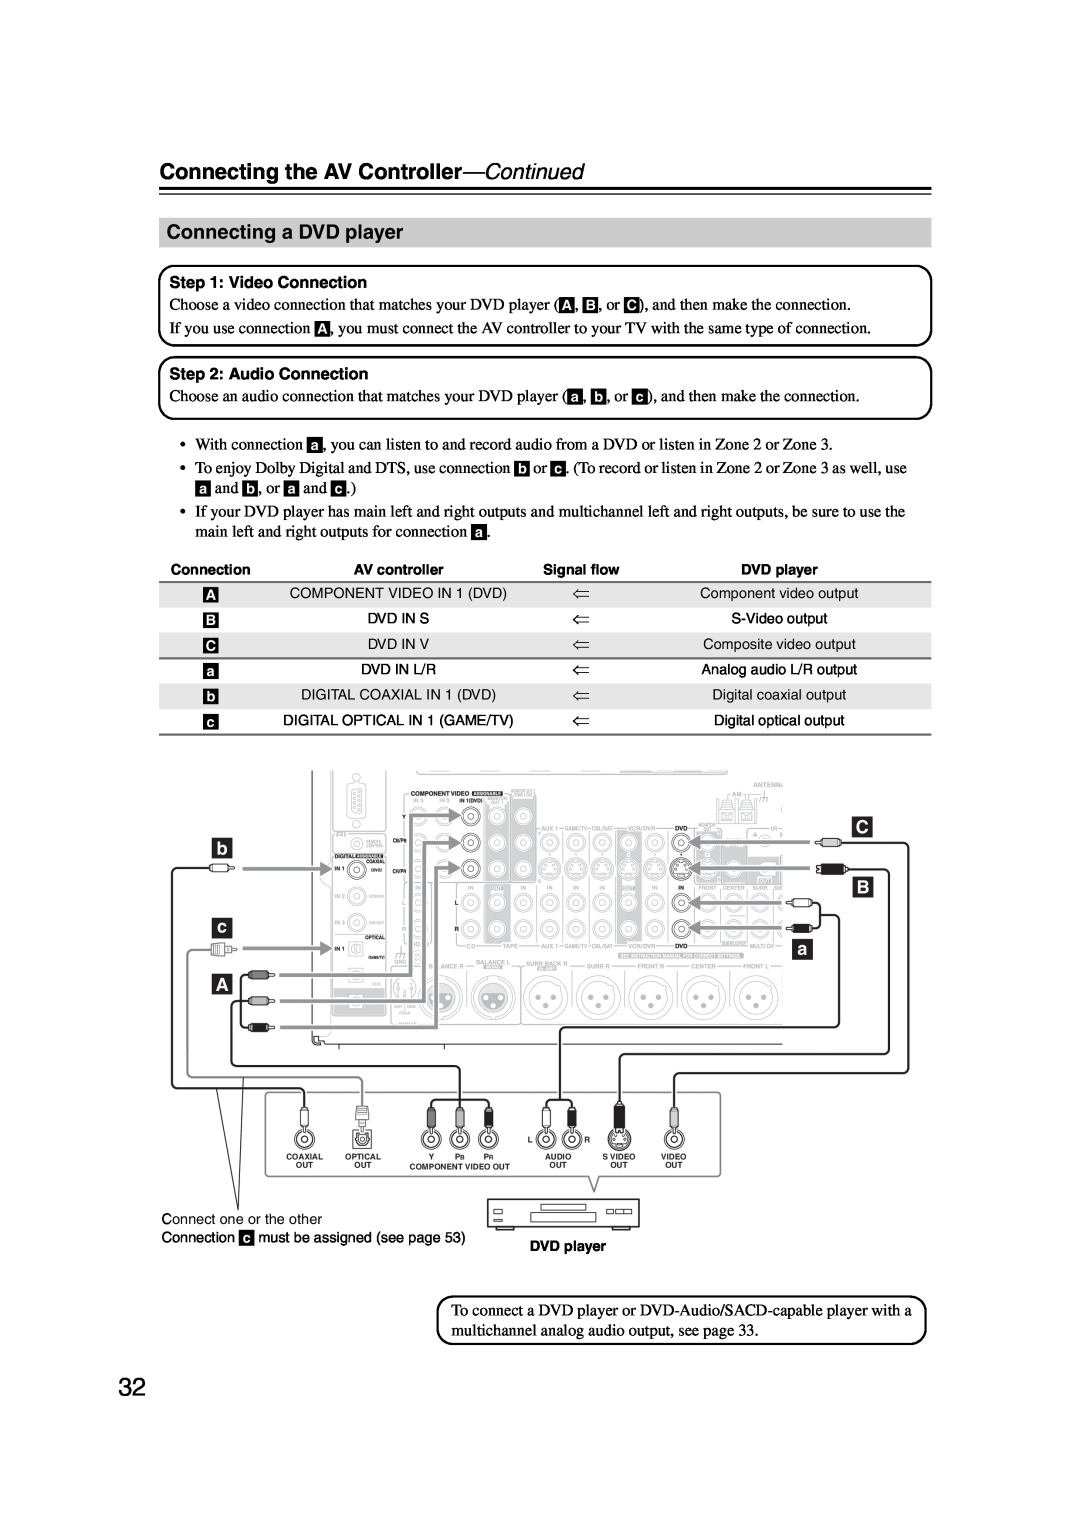 Integra DHC-9.9 instruction manual Connecting a DVD player, Connecting the AV Controller—Continued, C B a 